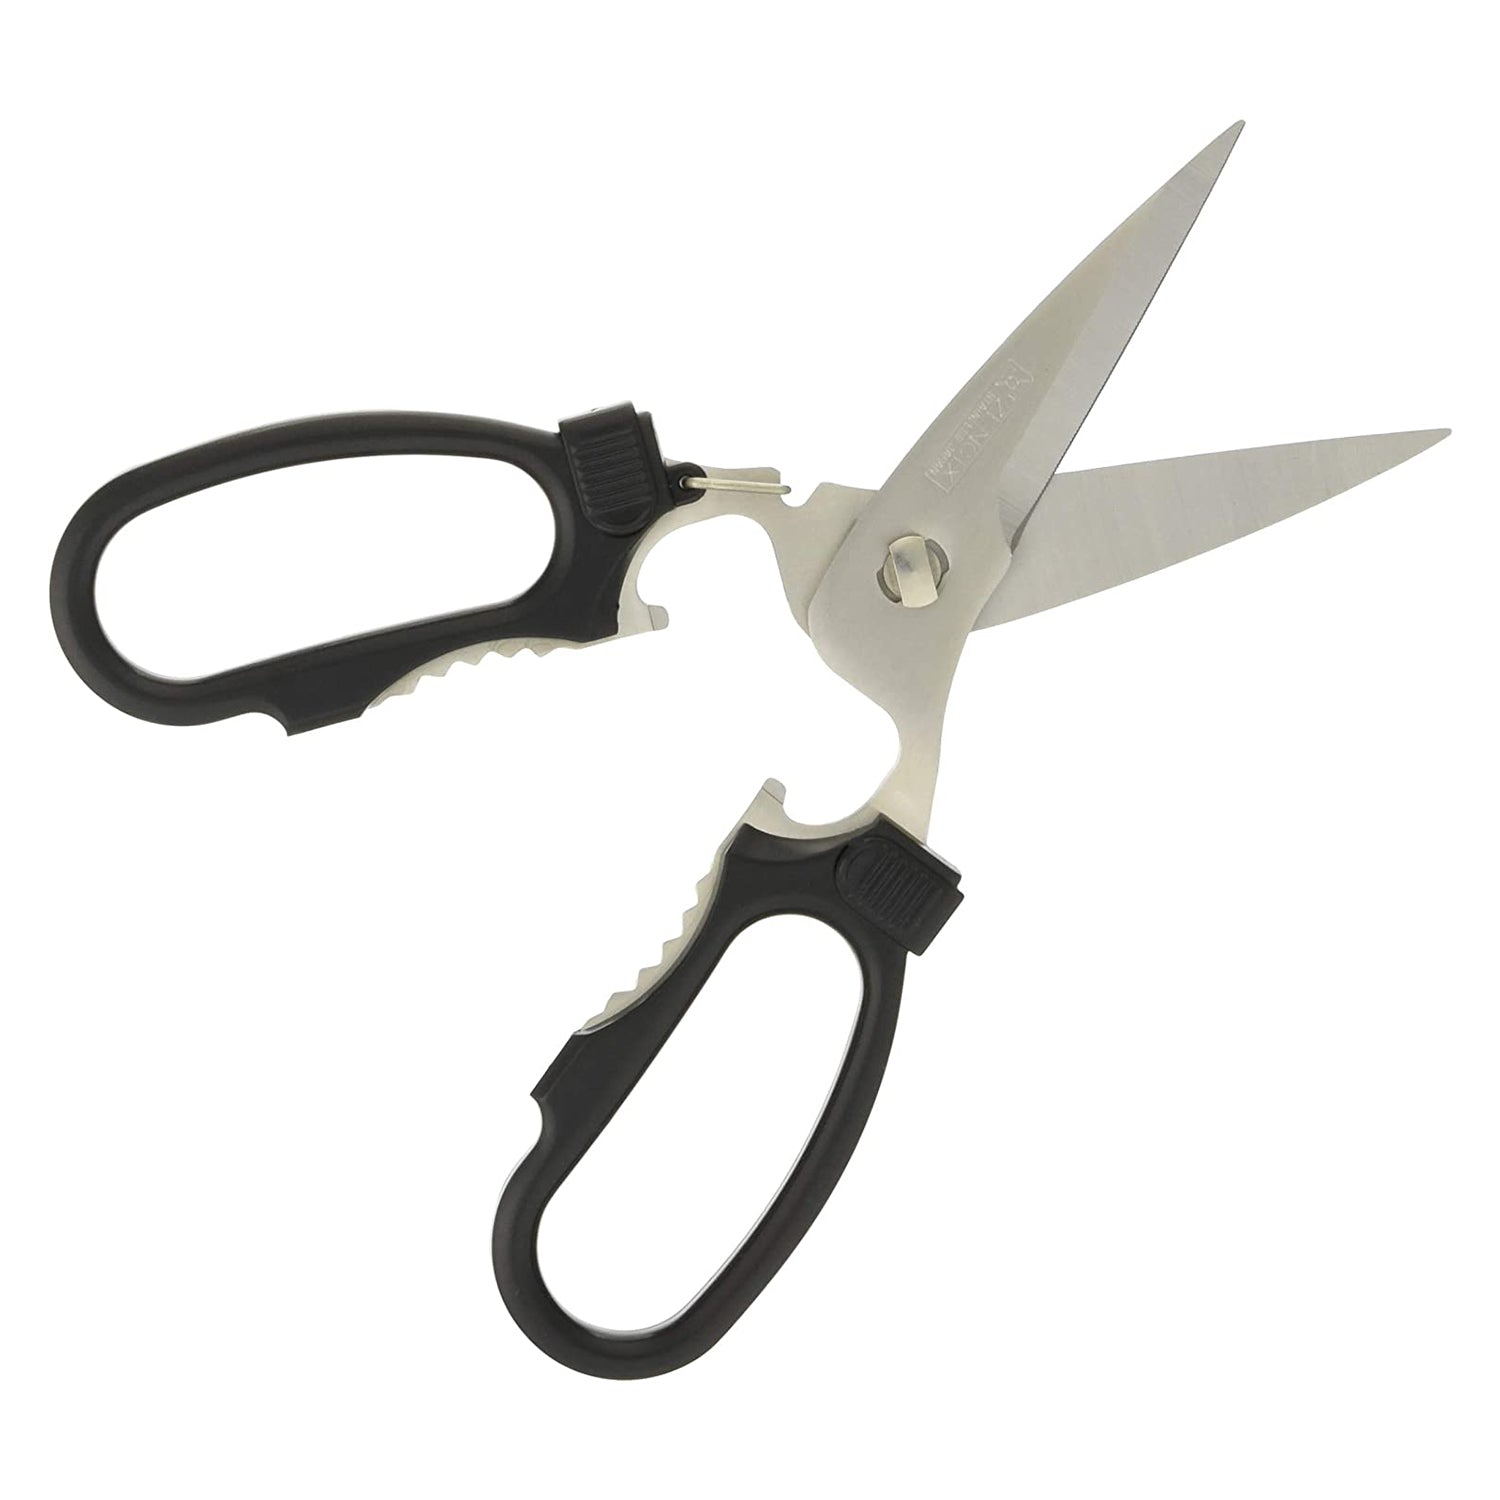 CANARY Japanese Kitchen Scissors Heavy Duty 8.2, Made in JAPAN, Dishwasher  Safe Come Apart Blade, Multipurpose Kitchen Scissors, Sharp Serrated